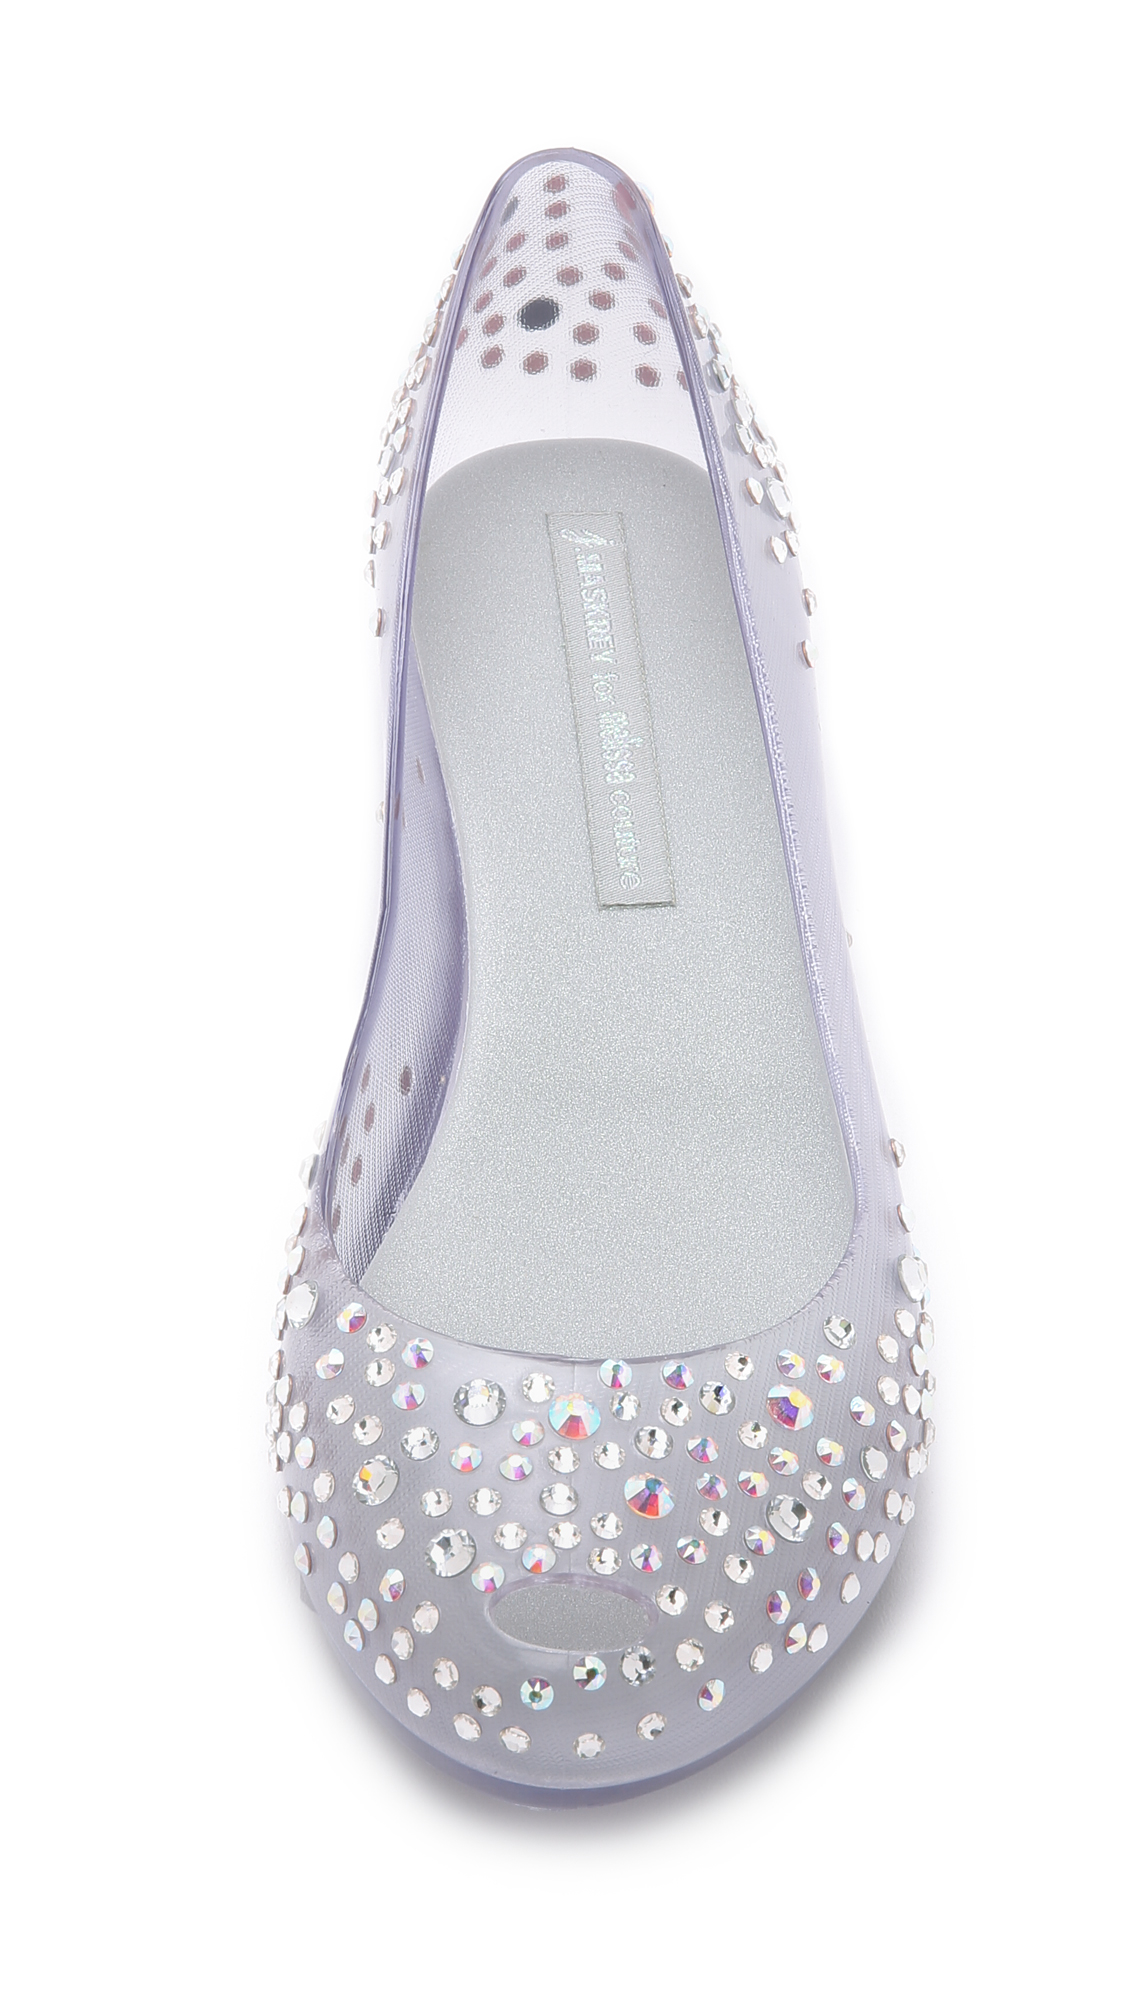 melissa crystal shoes